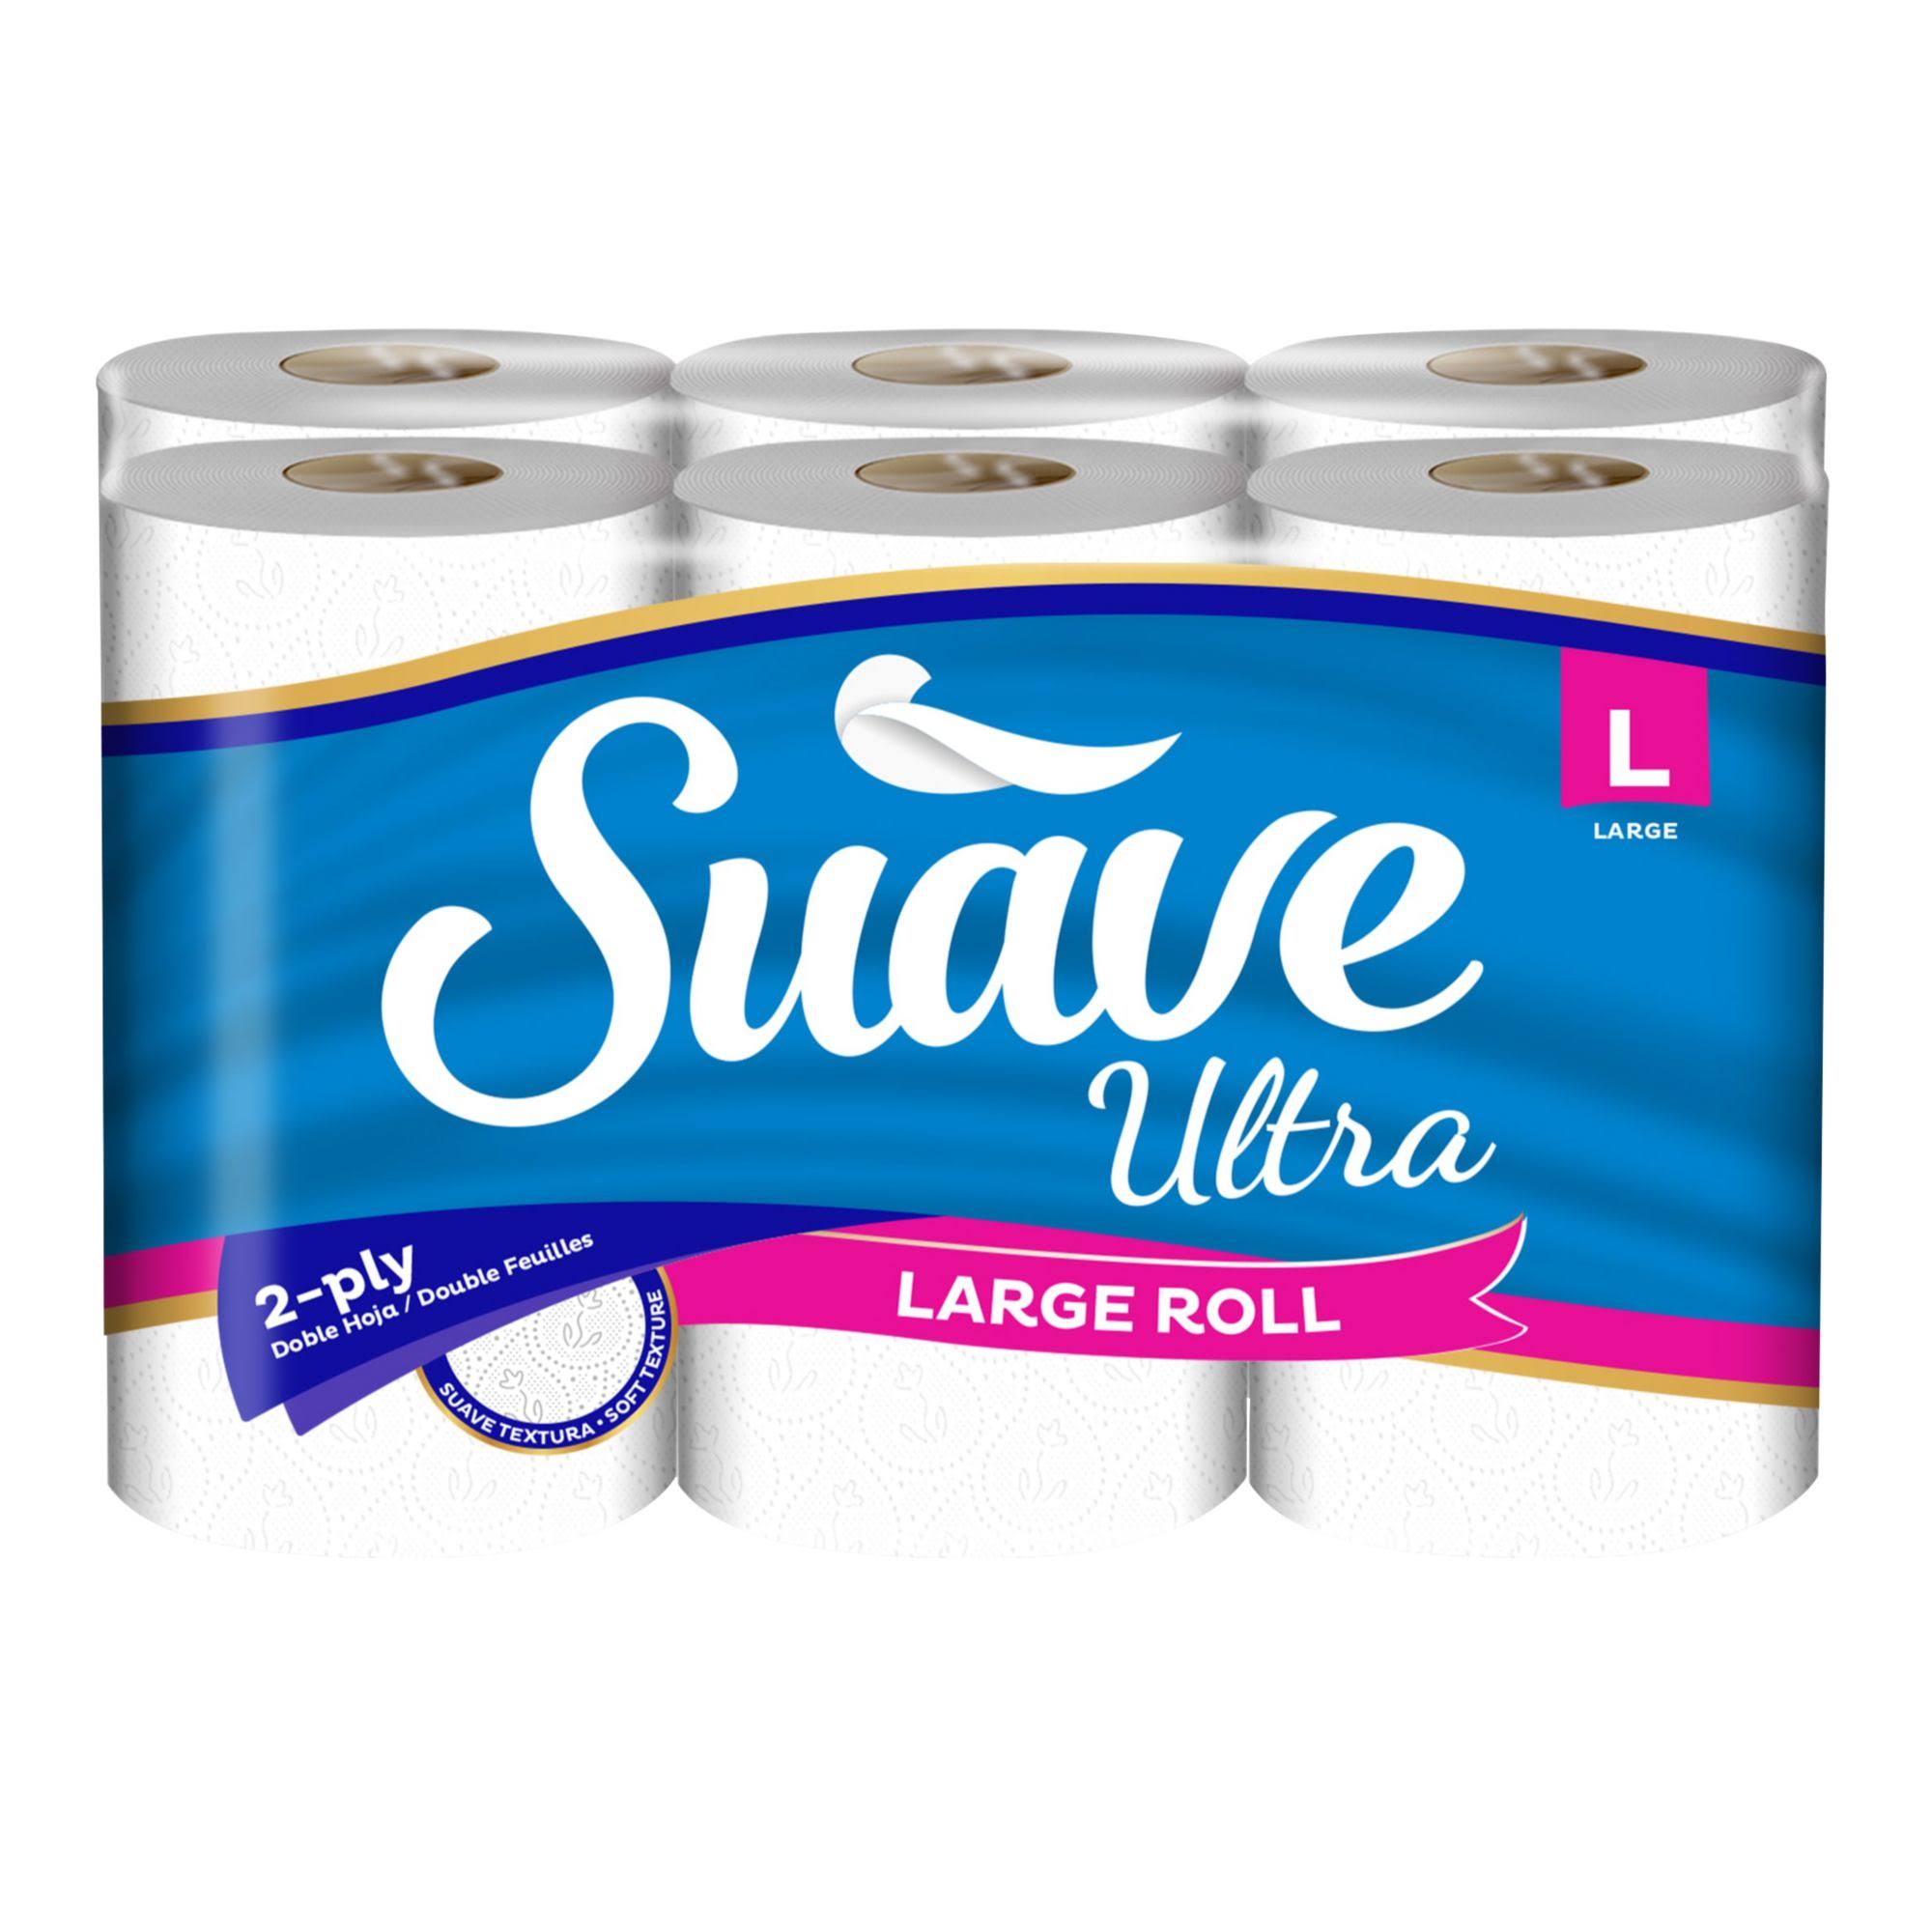 Suave Ultra Large Toilet Paper Rolls